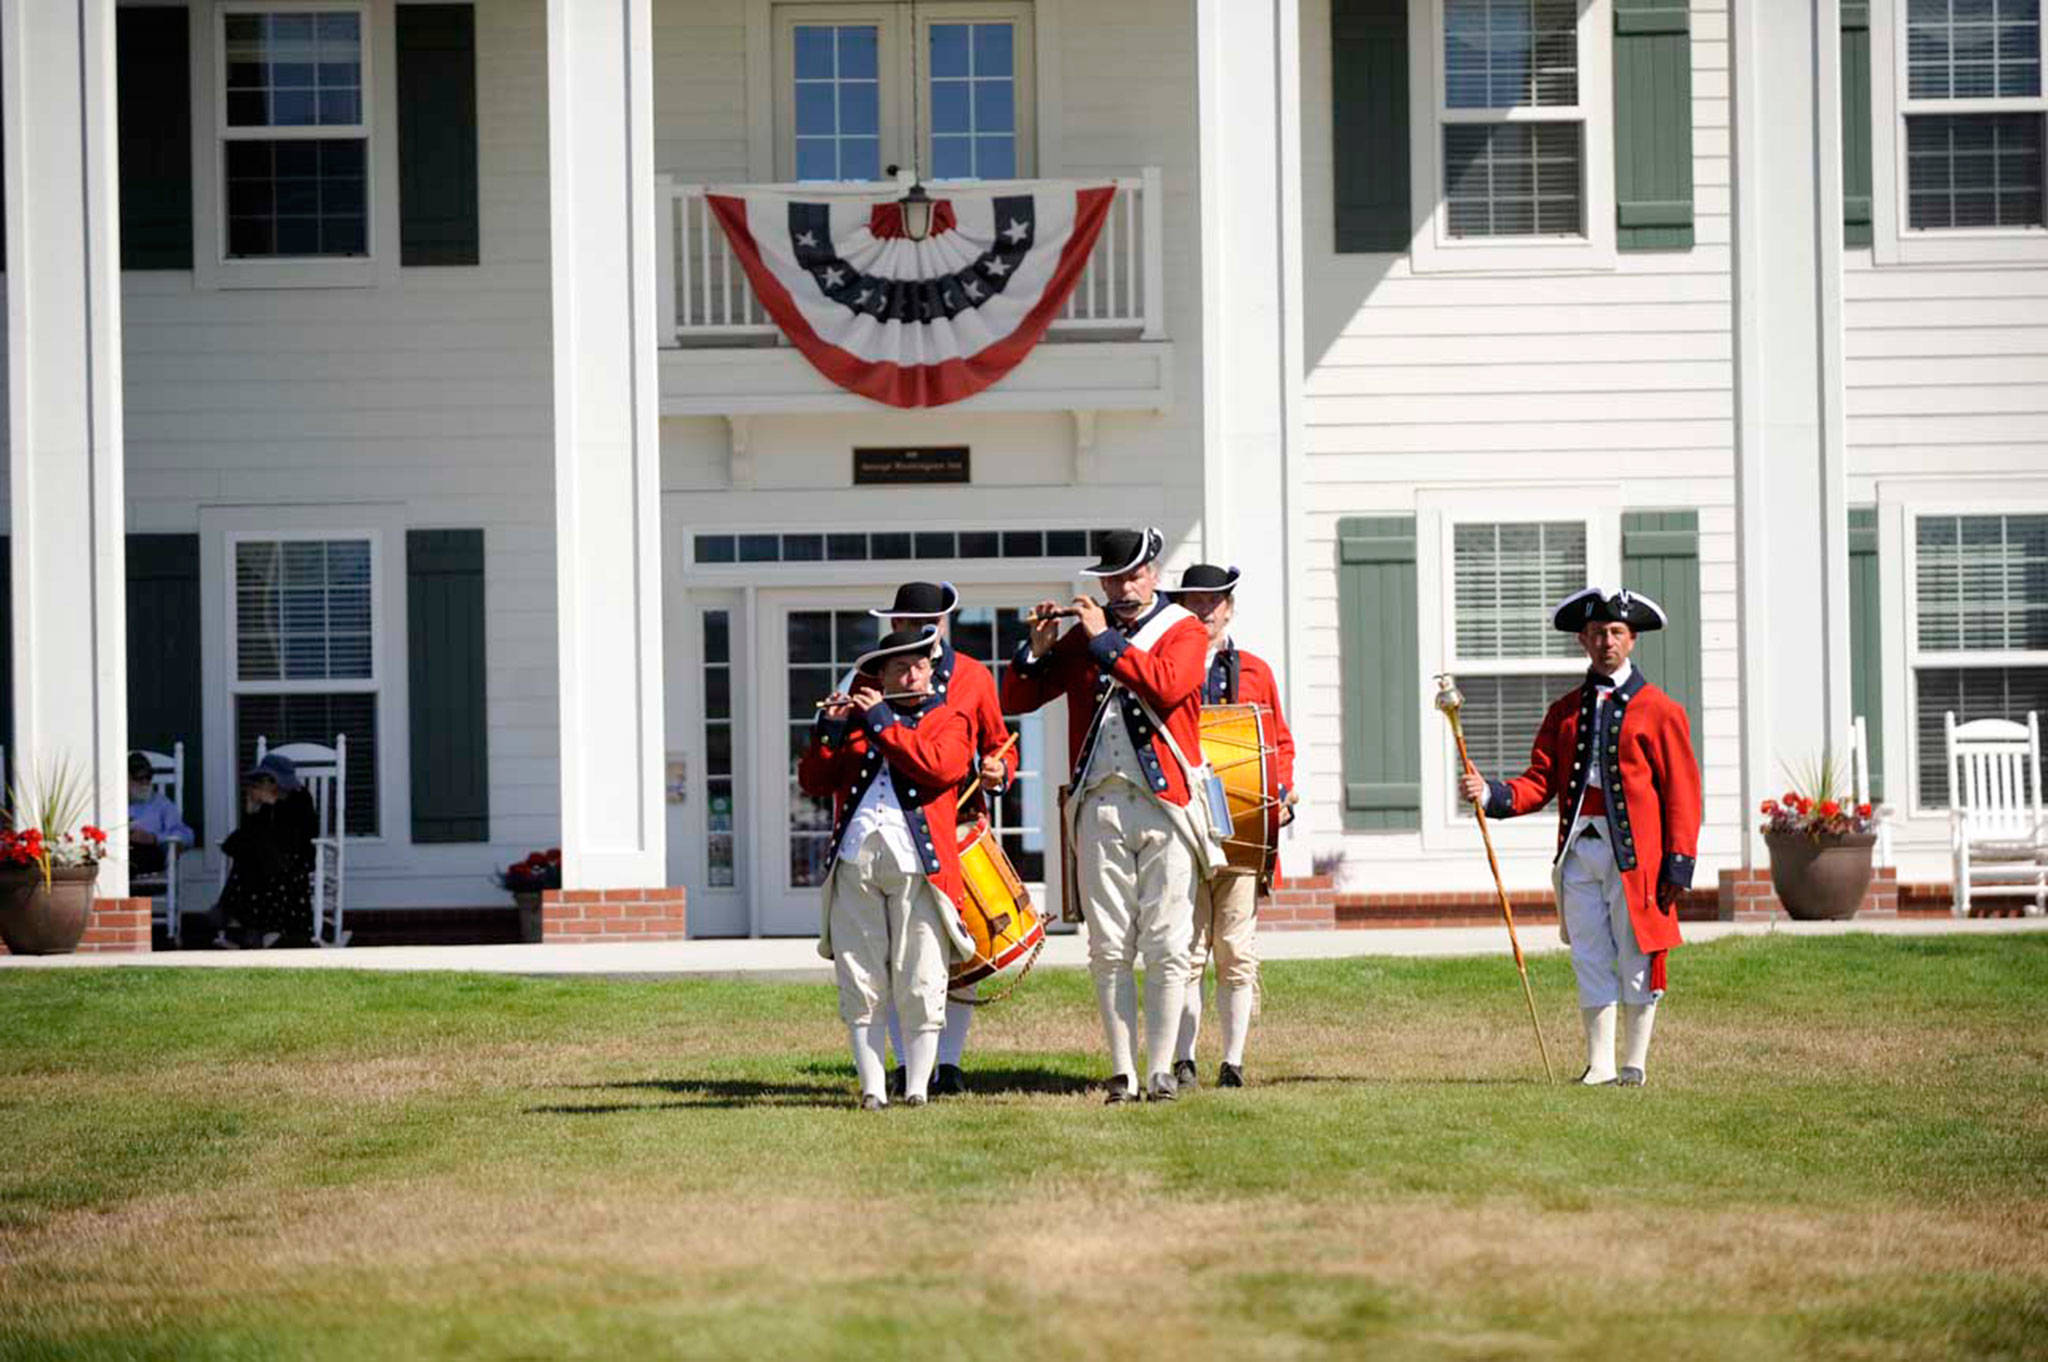 The Seattle area-based Columbia Fife & Drum Corps, seen here performing in 2016, returns to play at the Northwest Colonial Festival this week at the George Washington Inn. (Matthew Nash/Olympic Peninsula News Group)